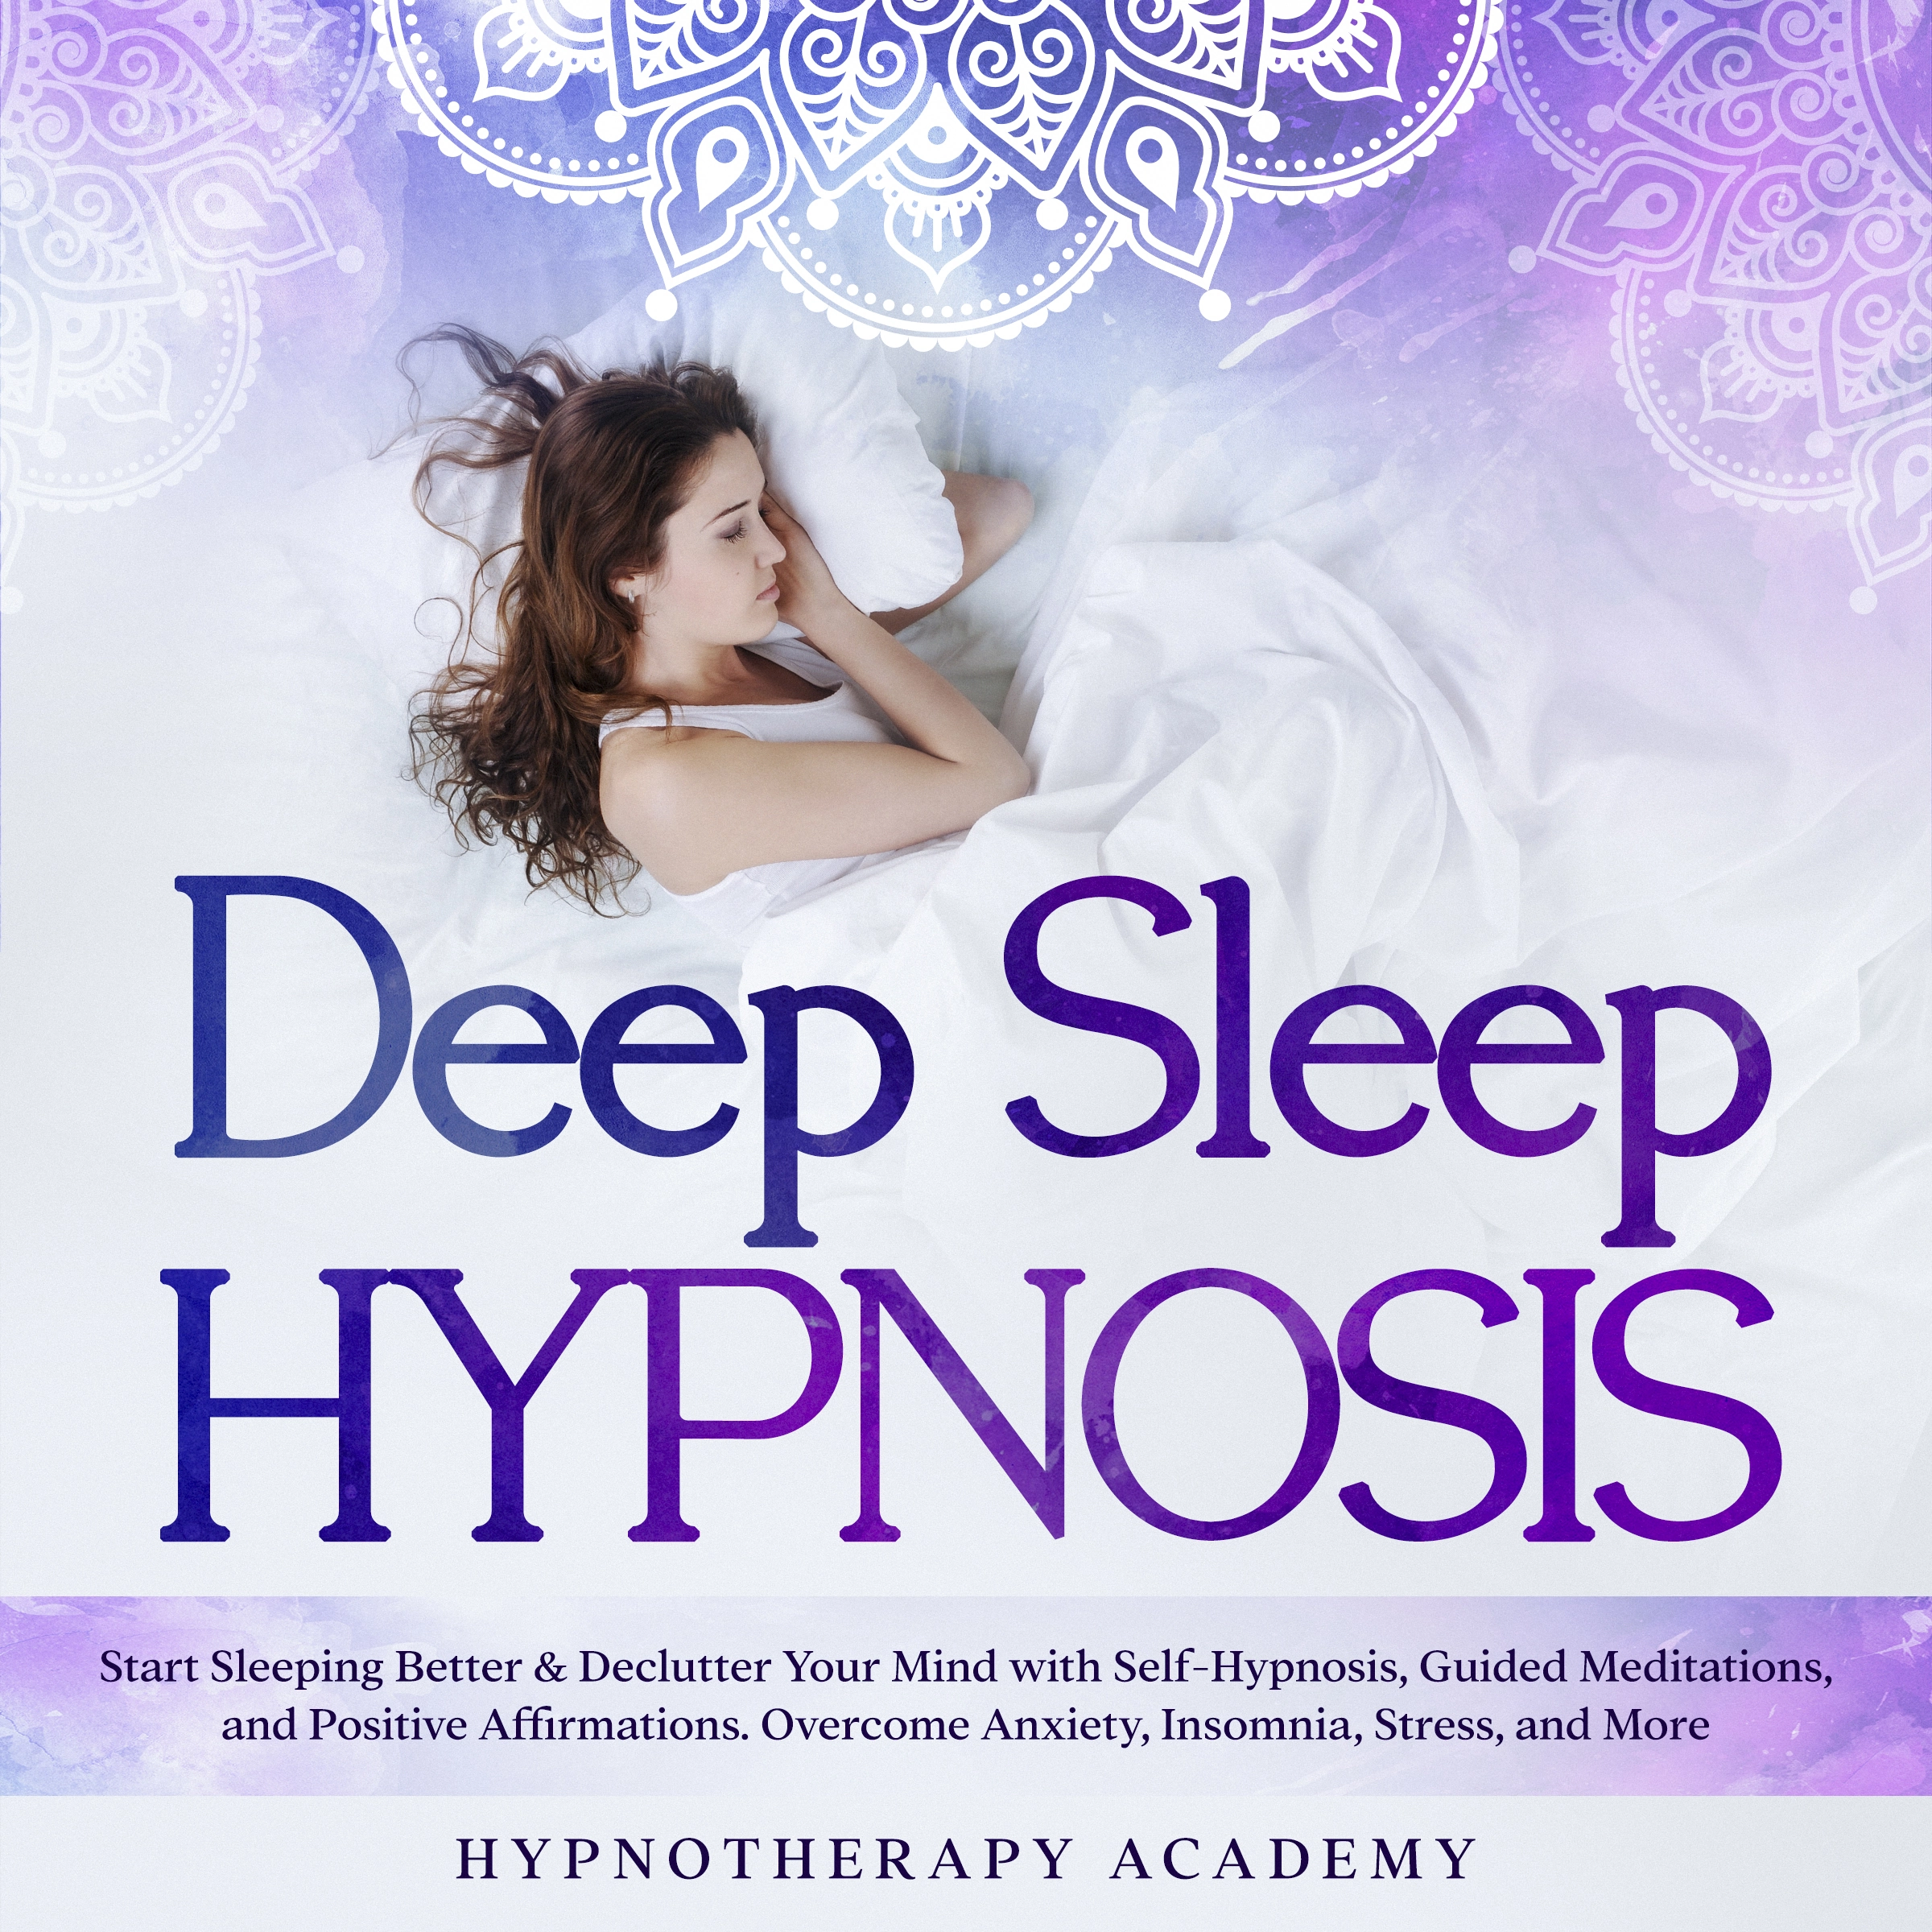 Deep Sleep Hypnosis: Start Sleeping Better & Declutter Your Mind with Self-Hypnosis, Guided Meditations, and Positive Affirmations. Overcome Anxiety, Insomnia, Stress, and More by Hypnotherapy Academy Audiobook